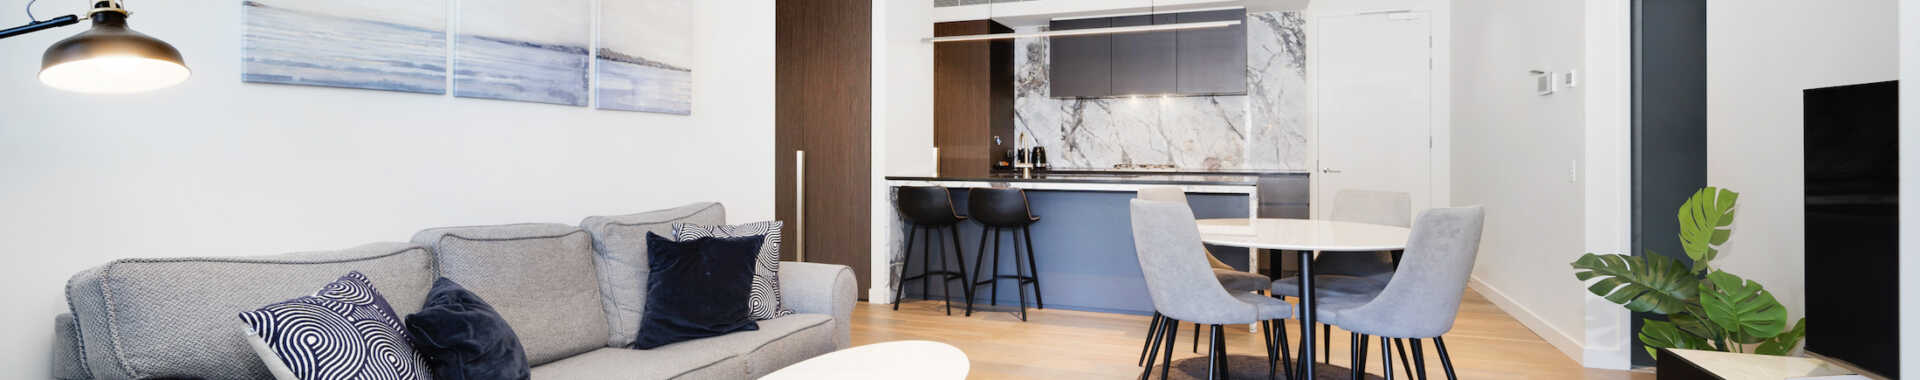 Astra corporate furnished apartments Melbourne for long stays